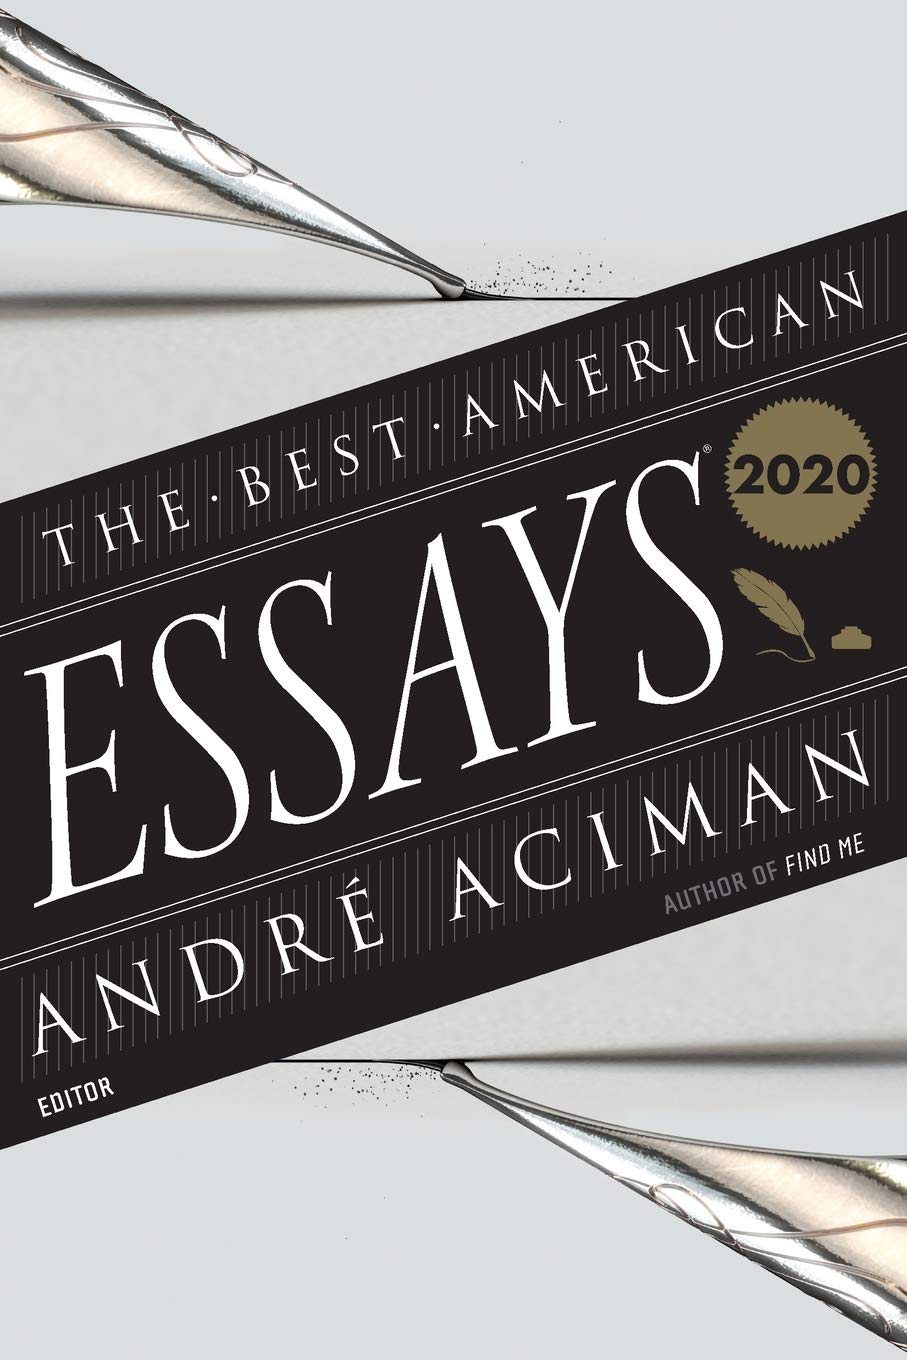 The Best American Essays edited by Robert Atwan and Kathryn Schulz